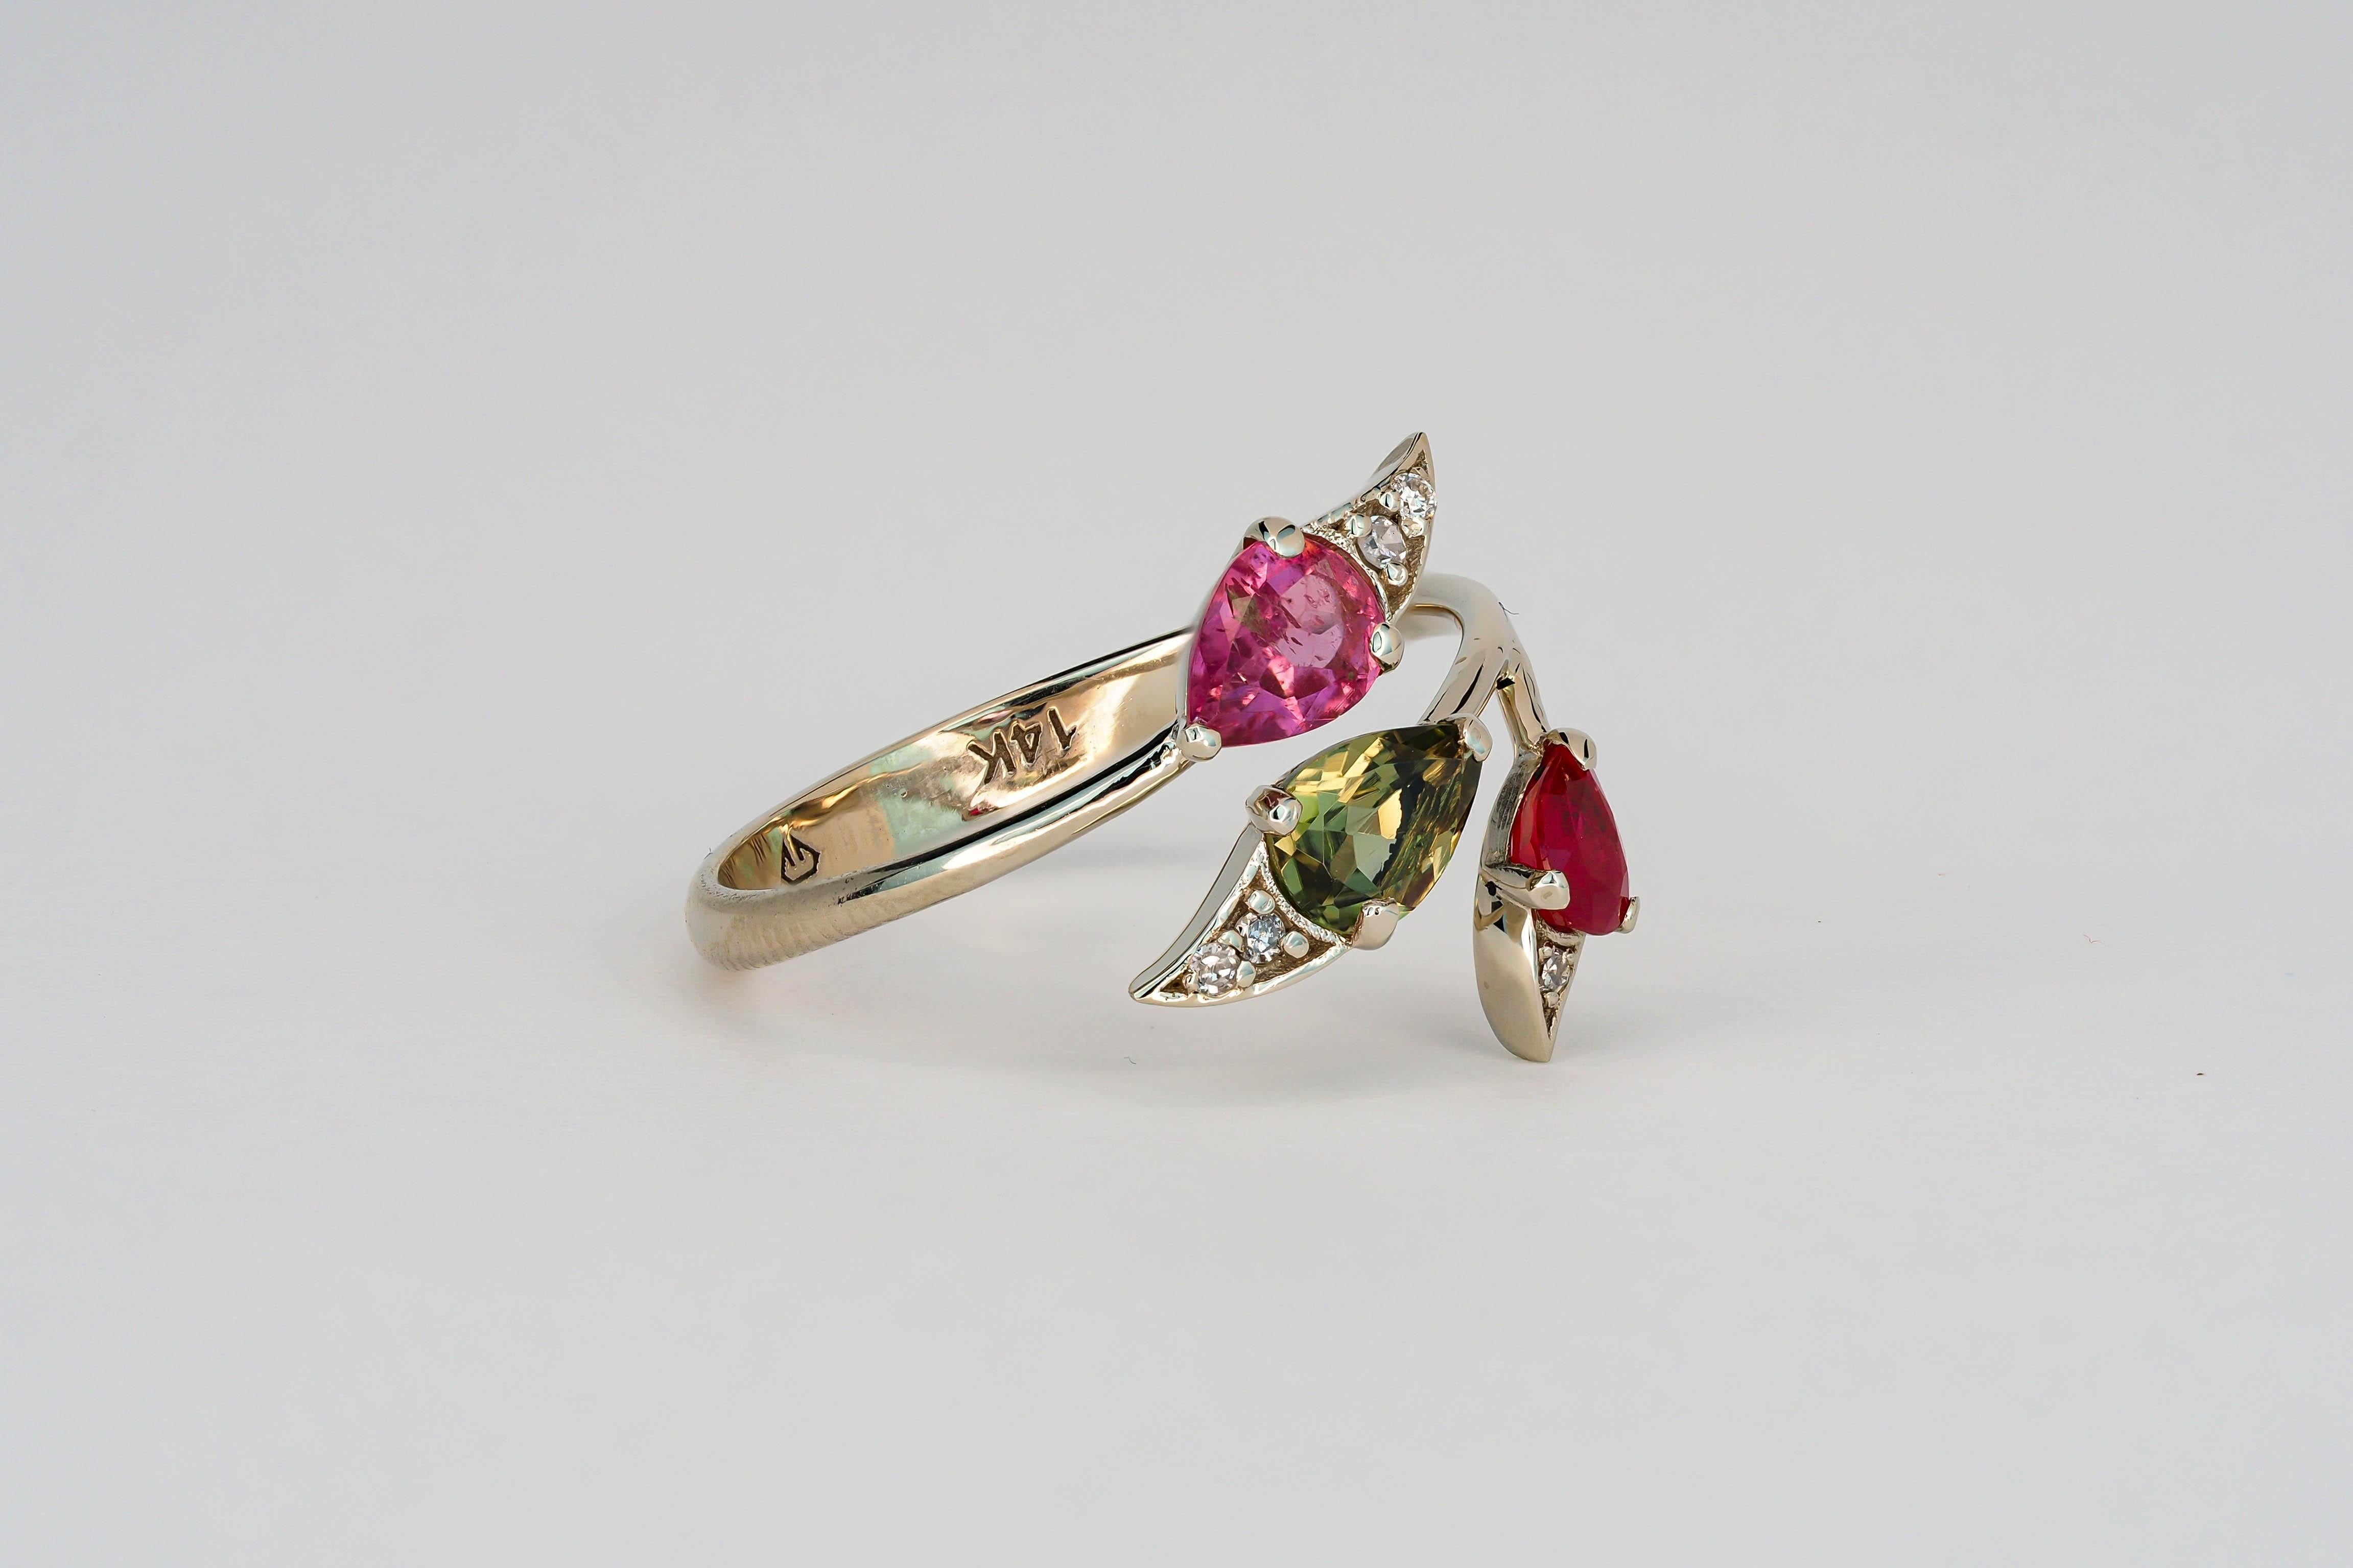 For Sale:  3 gemstone ring. Tourmalines and ruby gold ring. Multicolor gemstones ring. 6